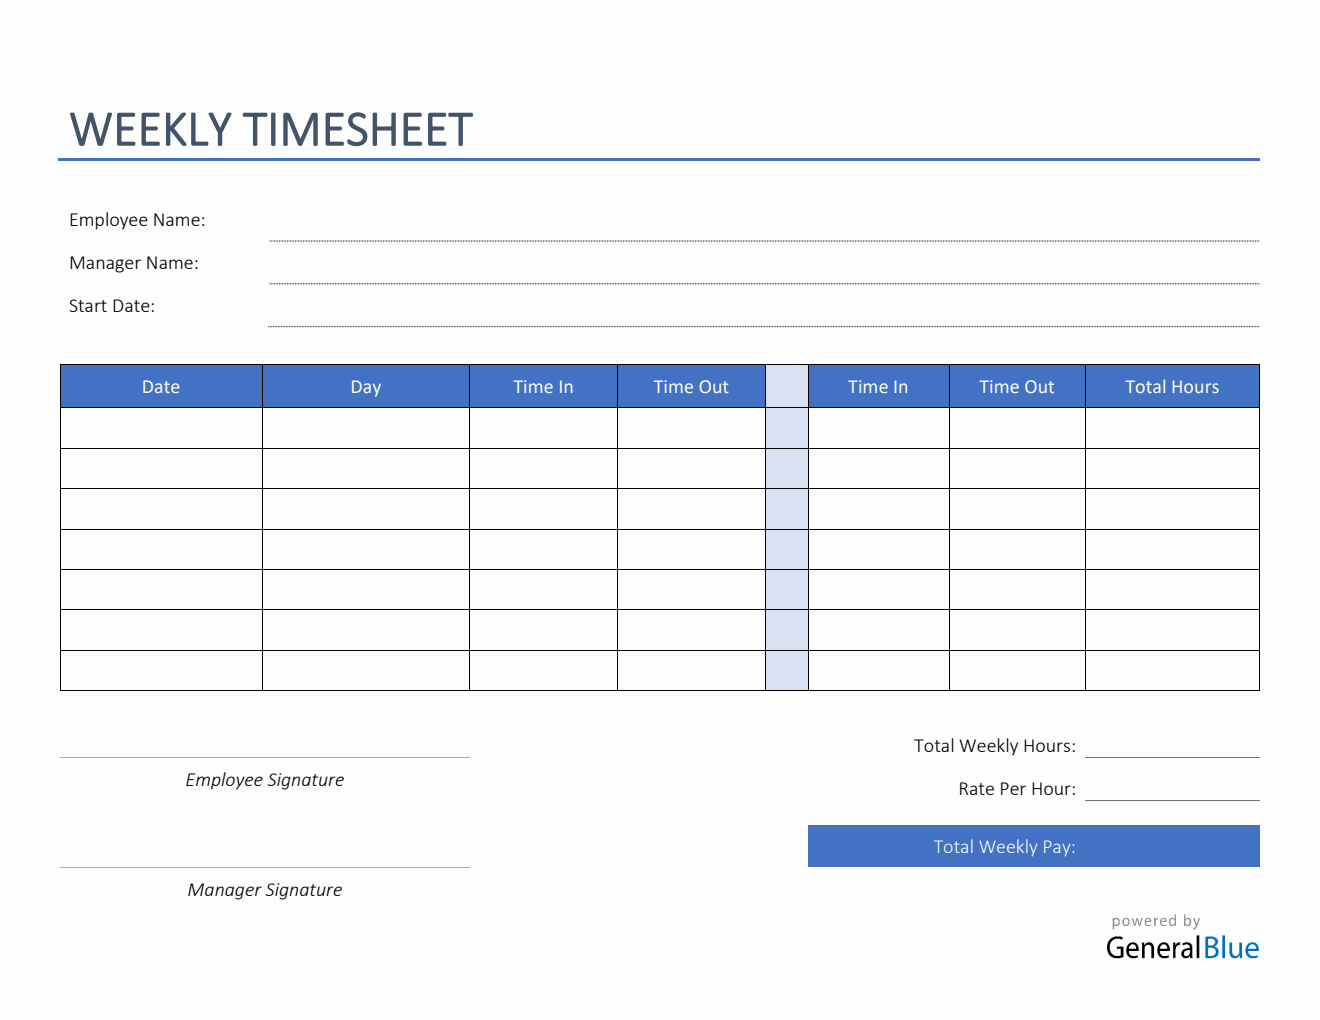 weekly-timesheet-template-free-download